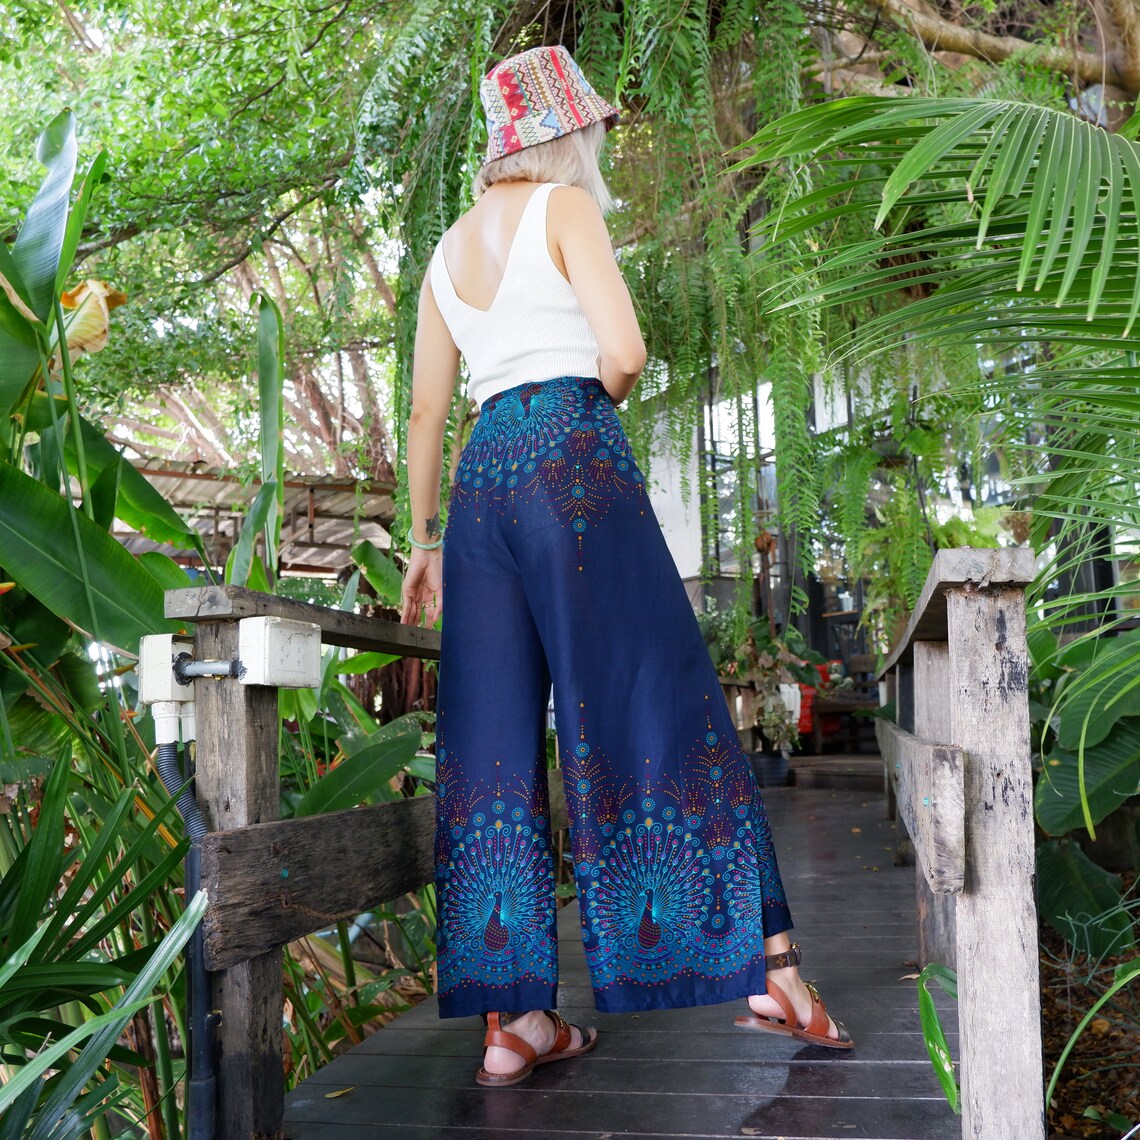 Stylish navy blue boho peacock print wrap pants paired with a chic white top, ideal for a fashionable outdoor look.